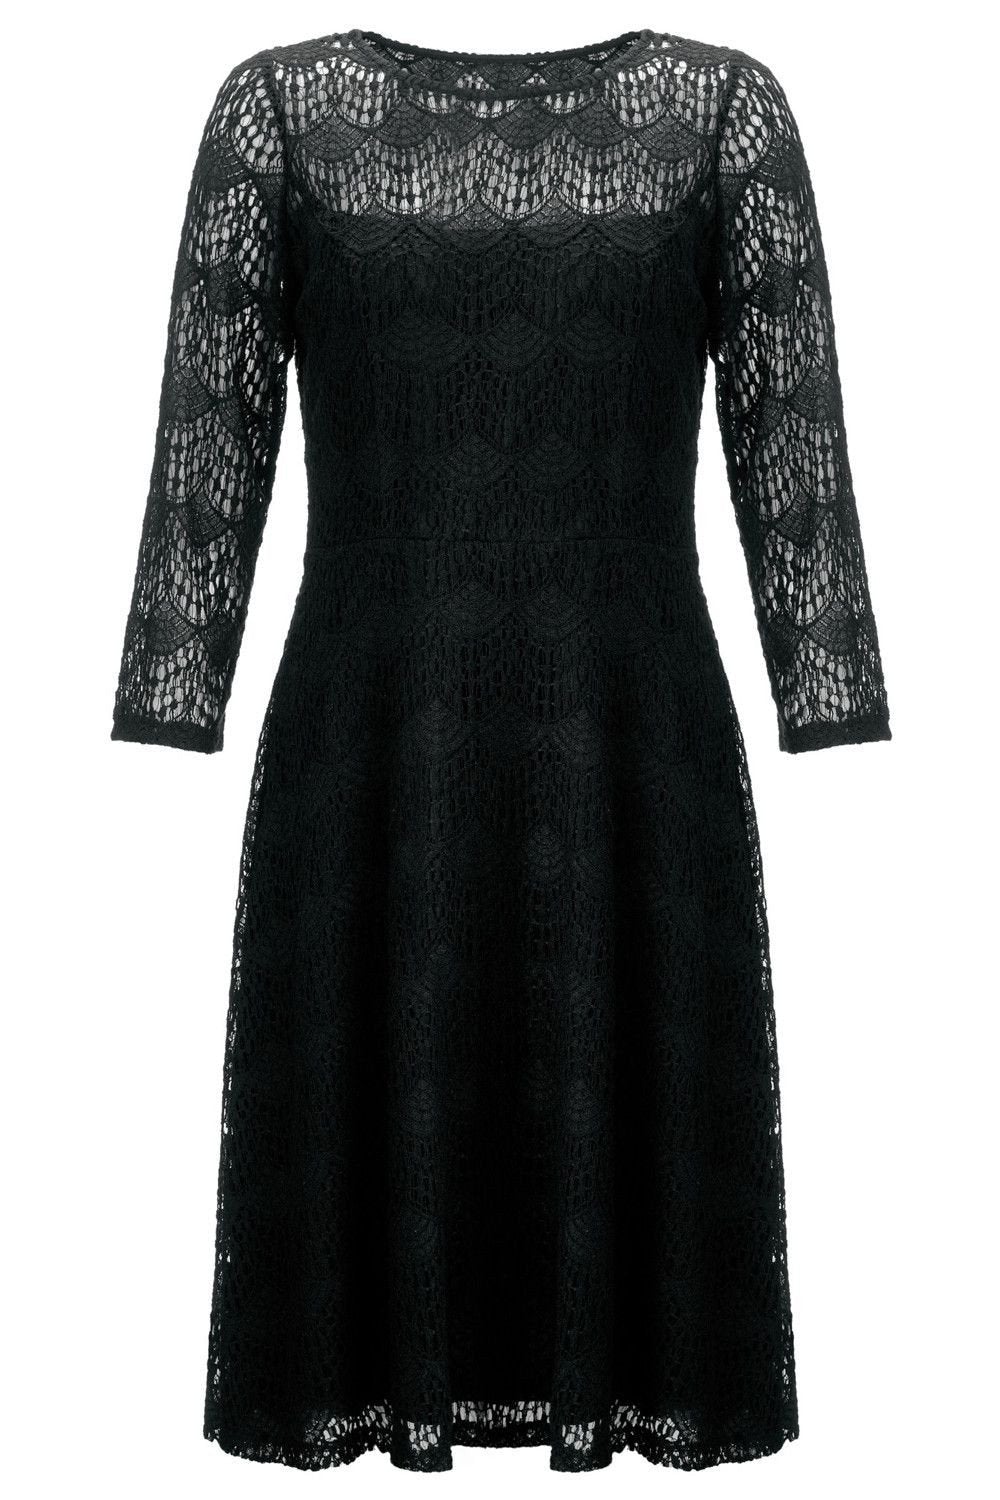 SOMERSET by ALICE TEMPERLEY Deco Lace Dress-Somerset by Alice Temperley-The Freperie